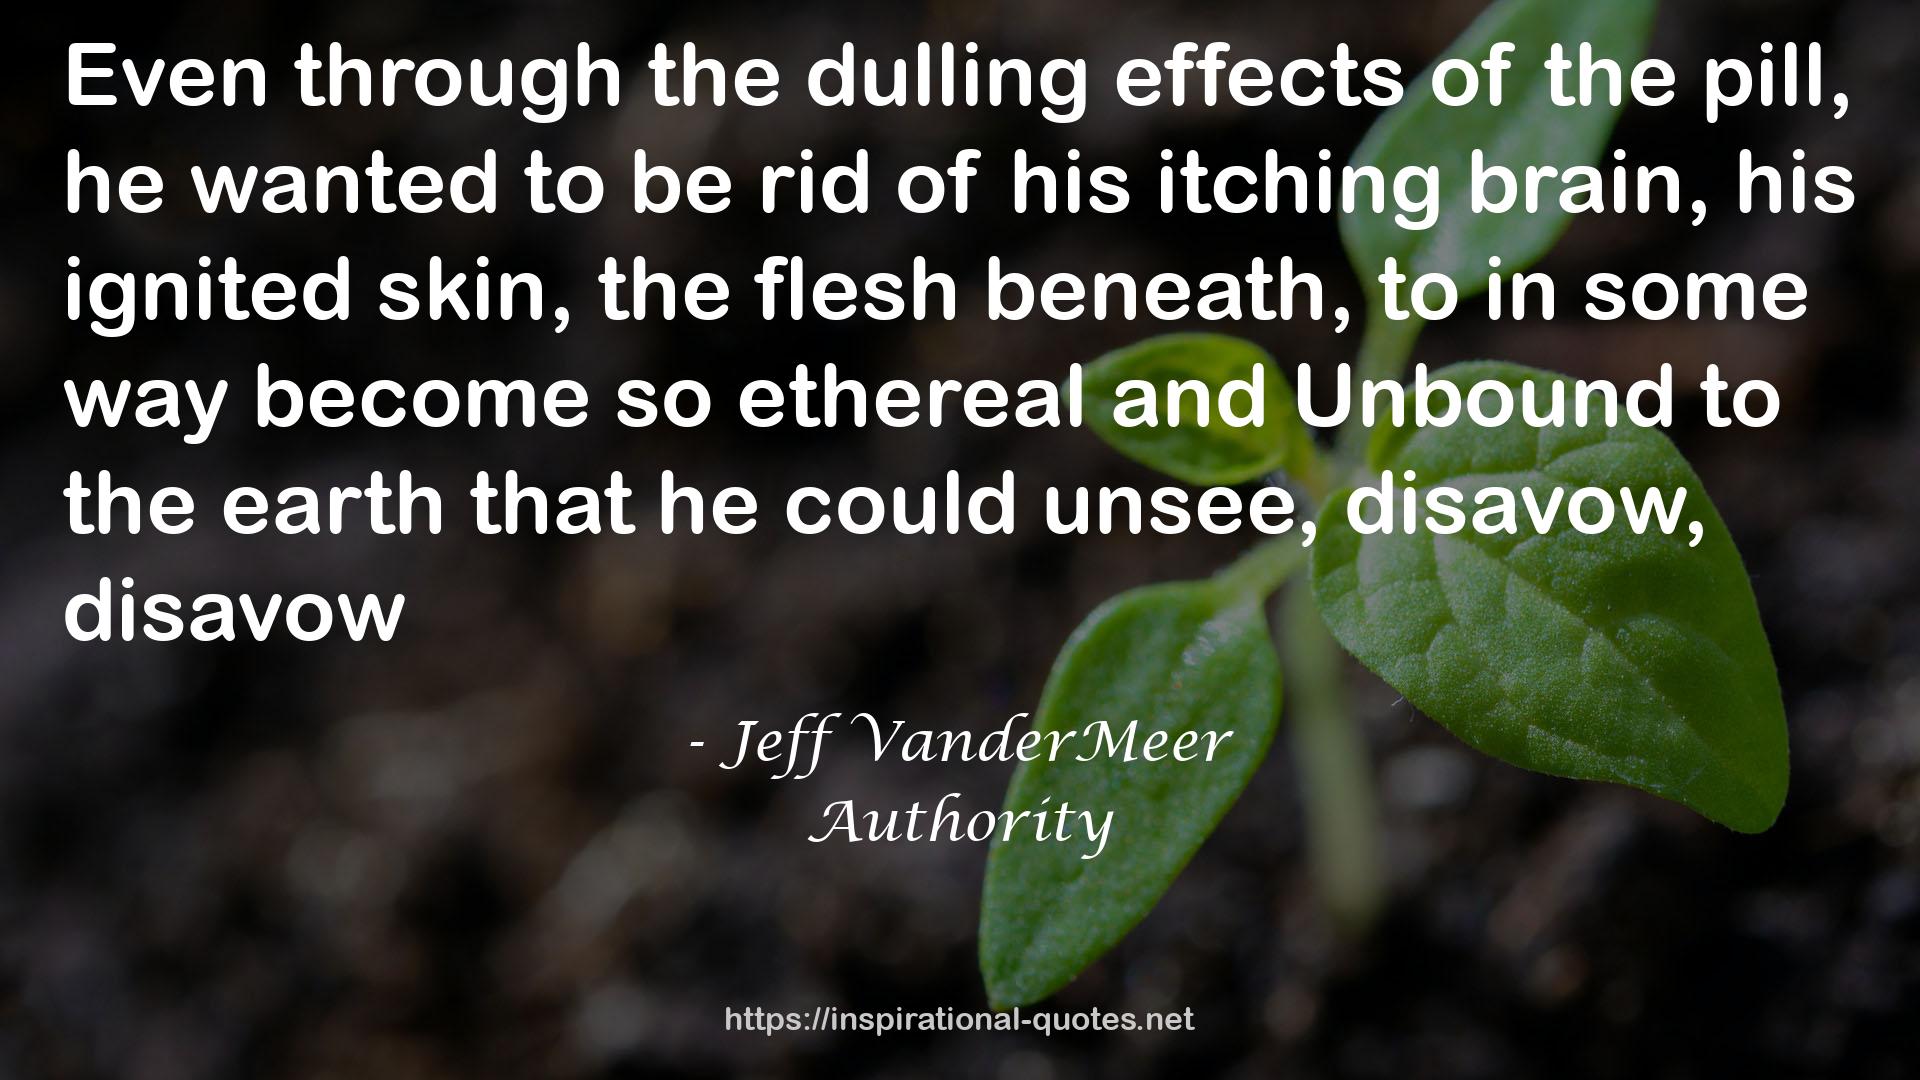 the dulling effects  QUOTES